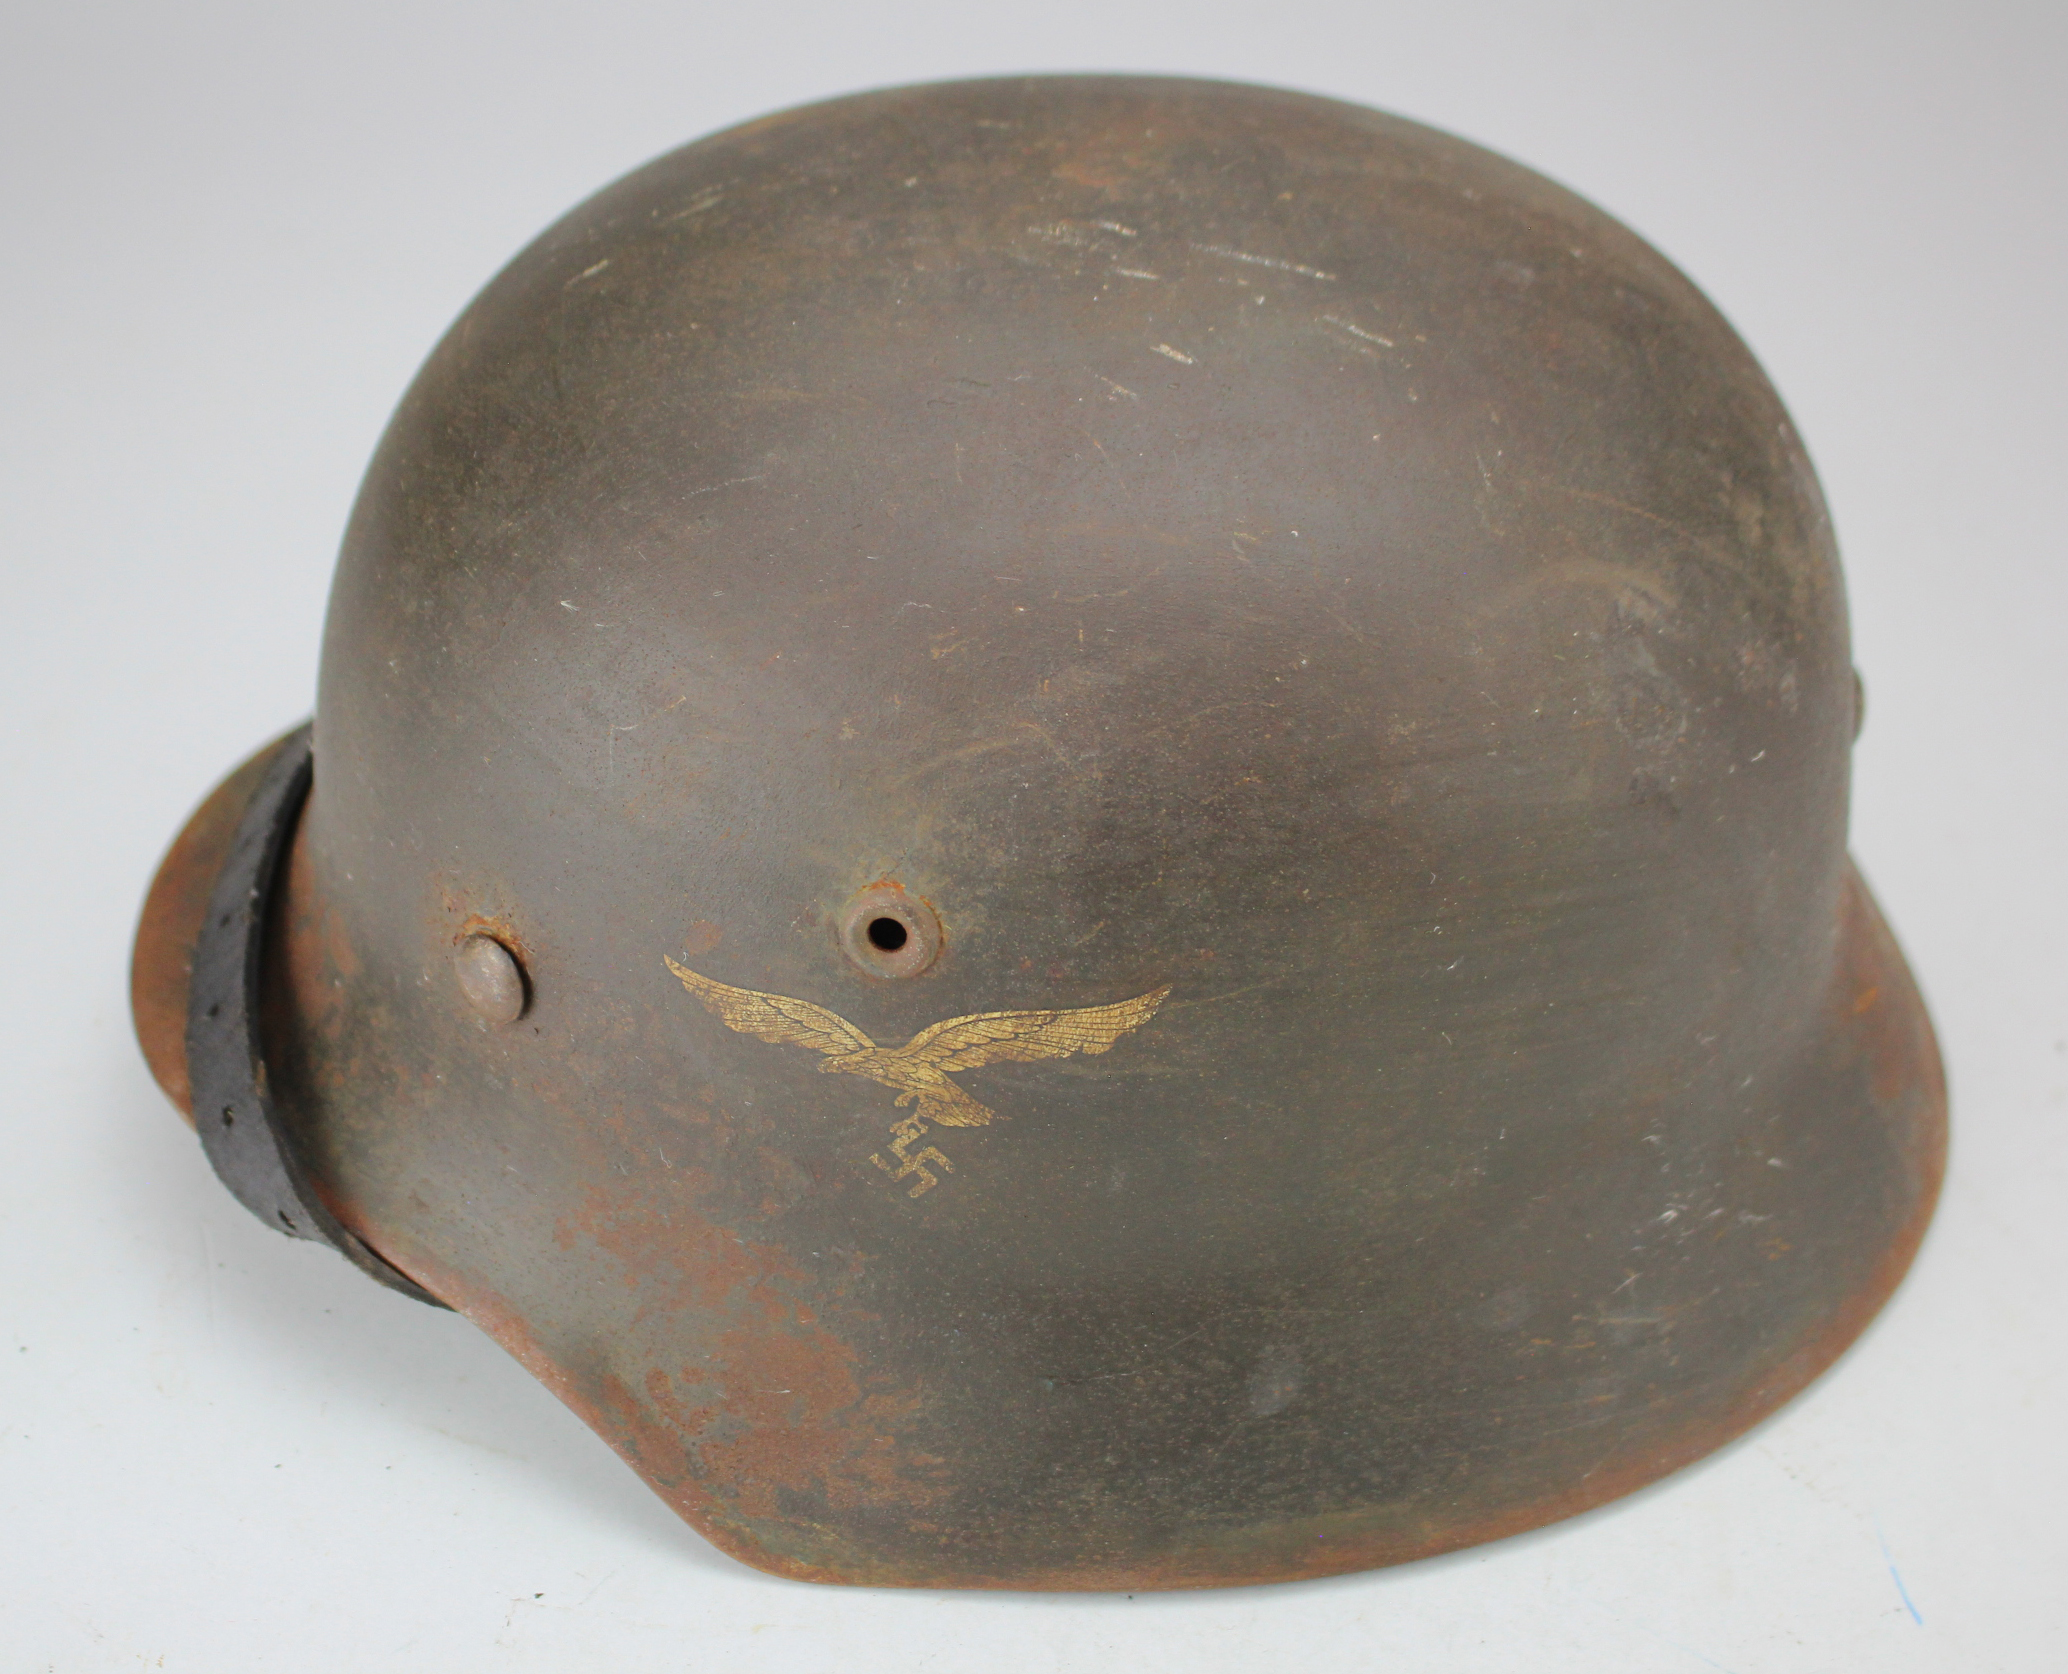 German Luftwaffe M35 single decal combat helmet, complete with liner and chinstrap, number 1575 on